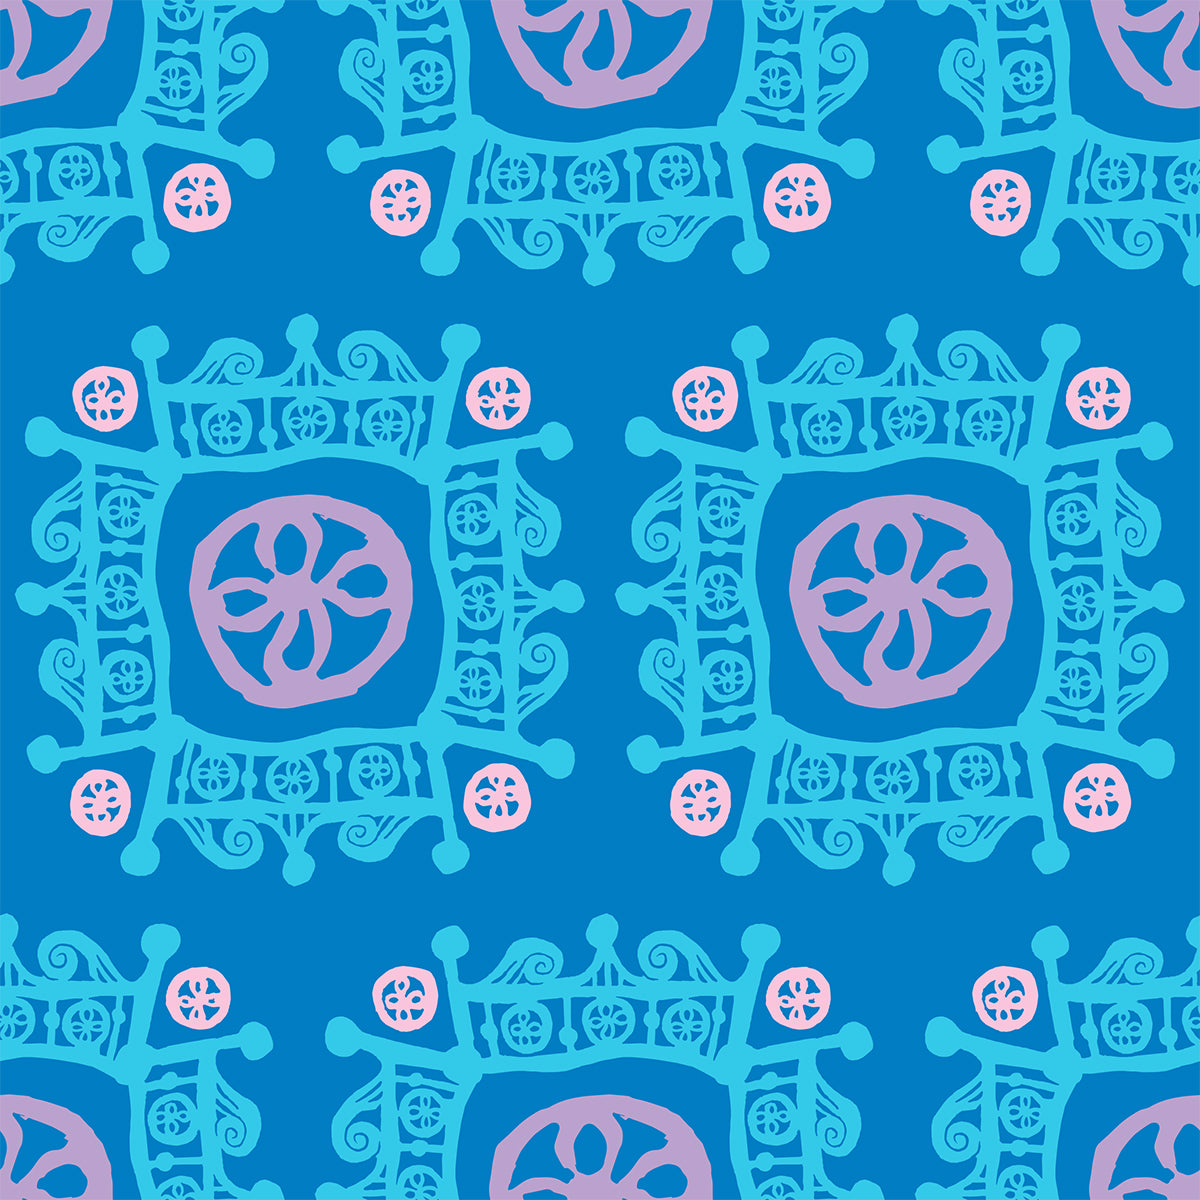 Rock on Royal Blue features a repeating pattern in blue, purple, and pink colors of hand-drawn flowers encased in ornate squares bordered by crown-like flourishes.